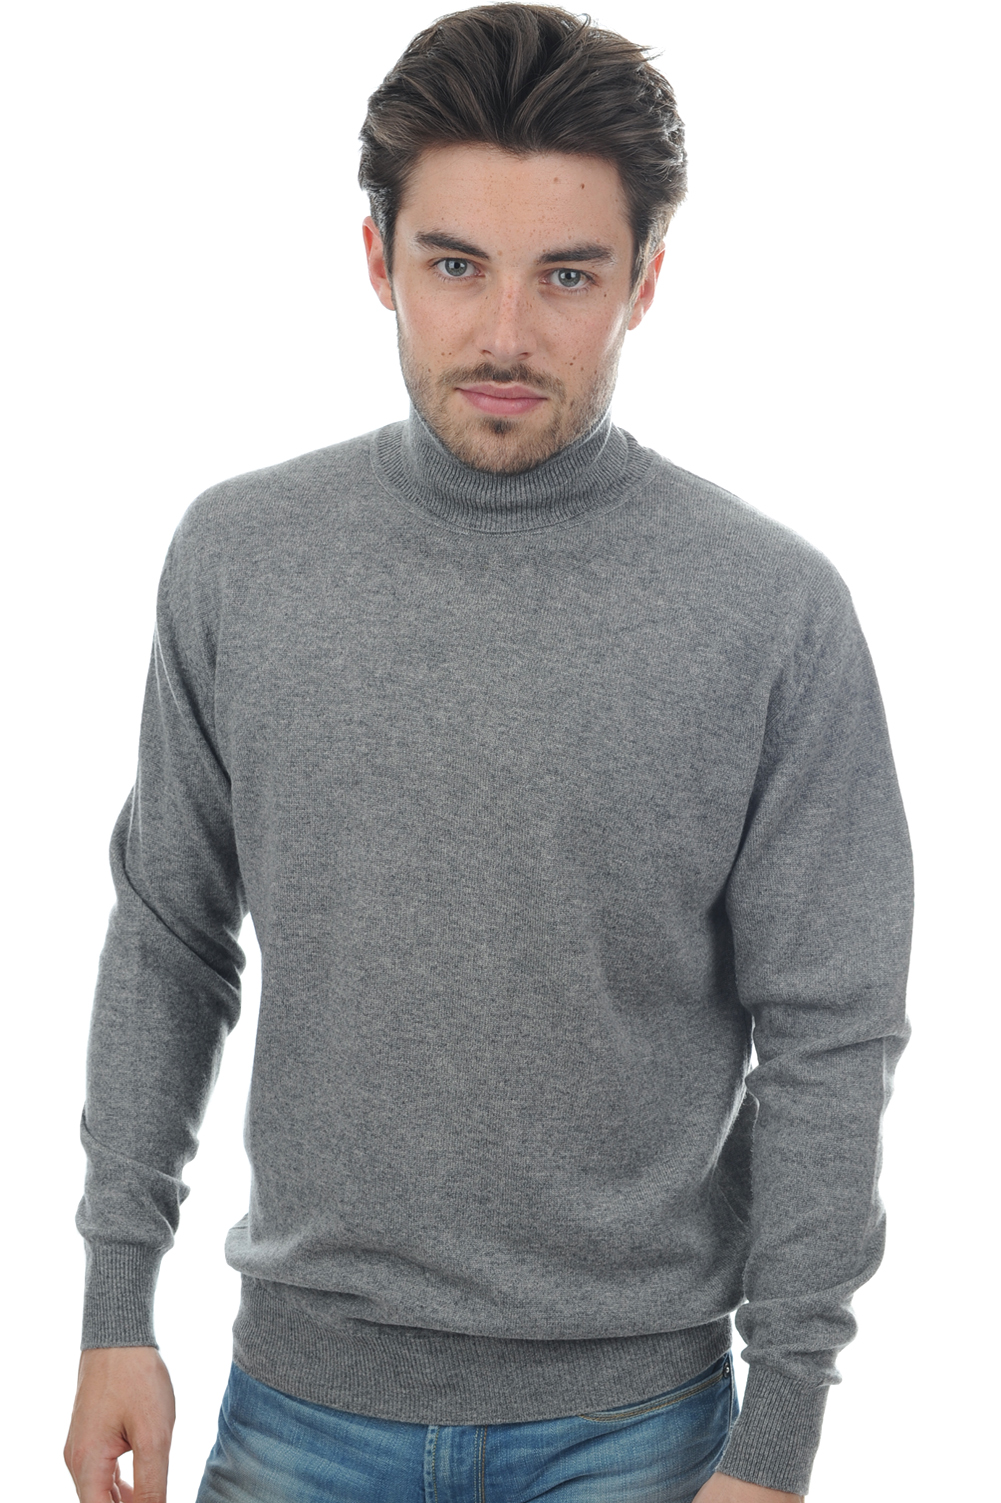 Cachemire pull homme edgar gris chine s